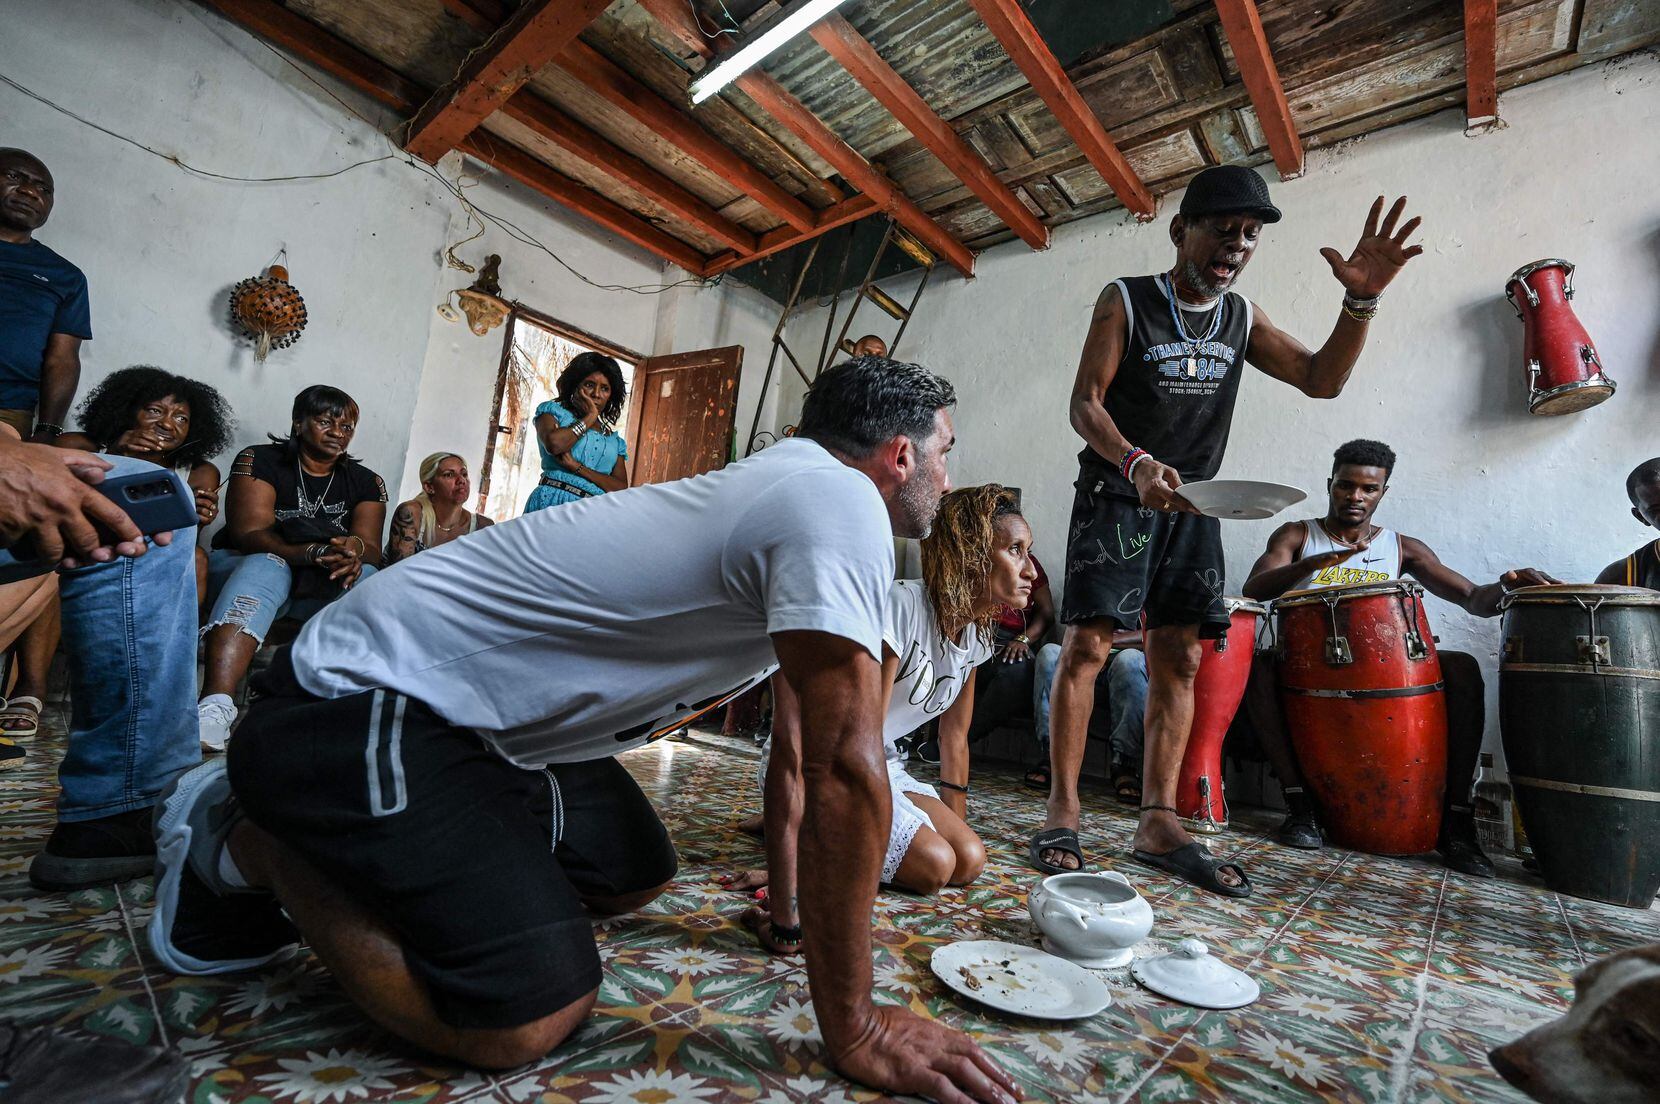 Cuban devotees of Santeria gather for a ritual on September 13, 2022 in a Havana house. The...